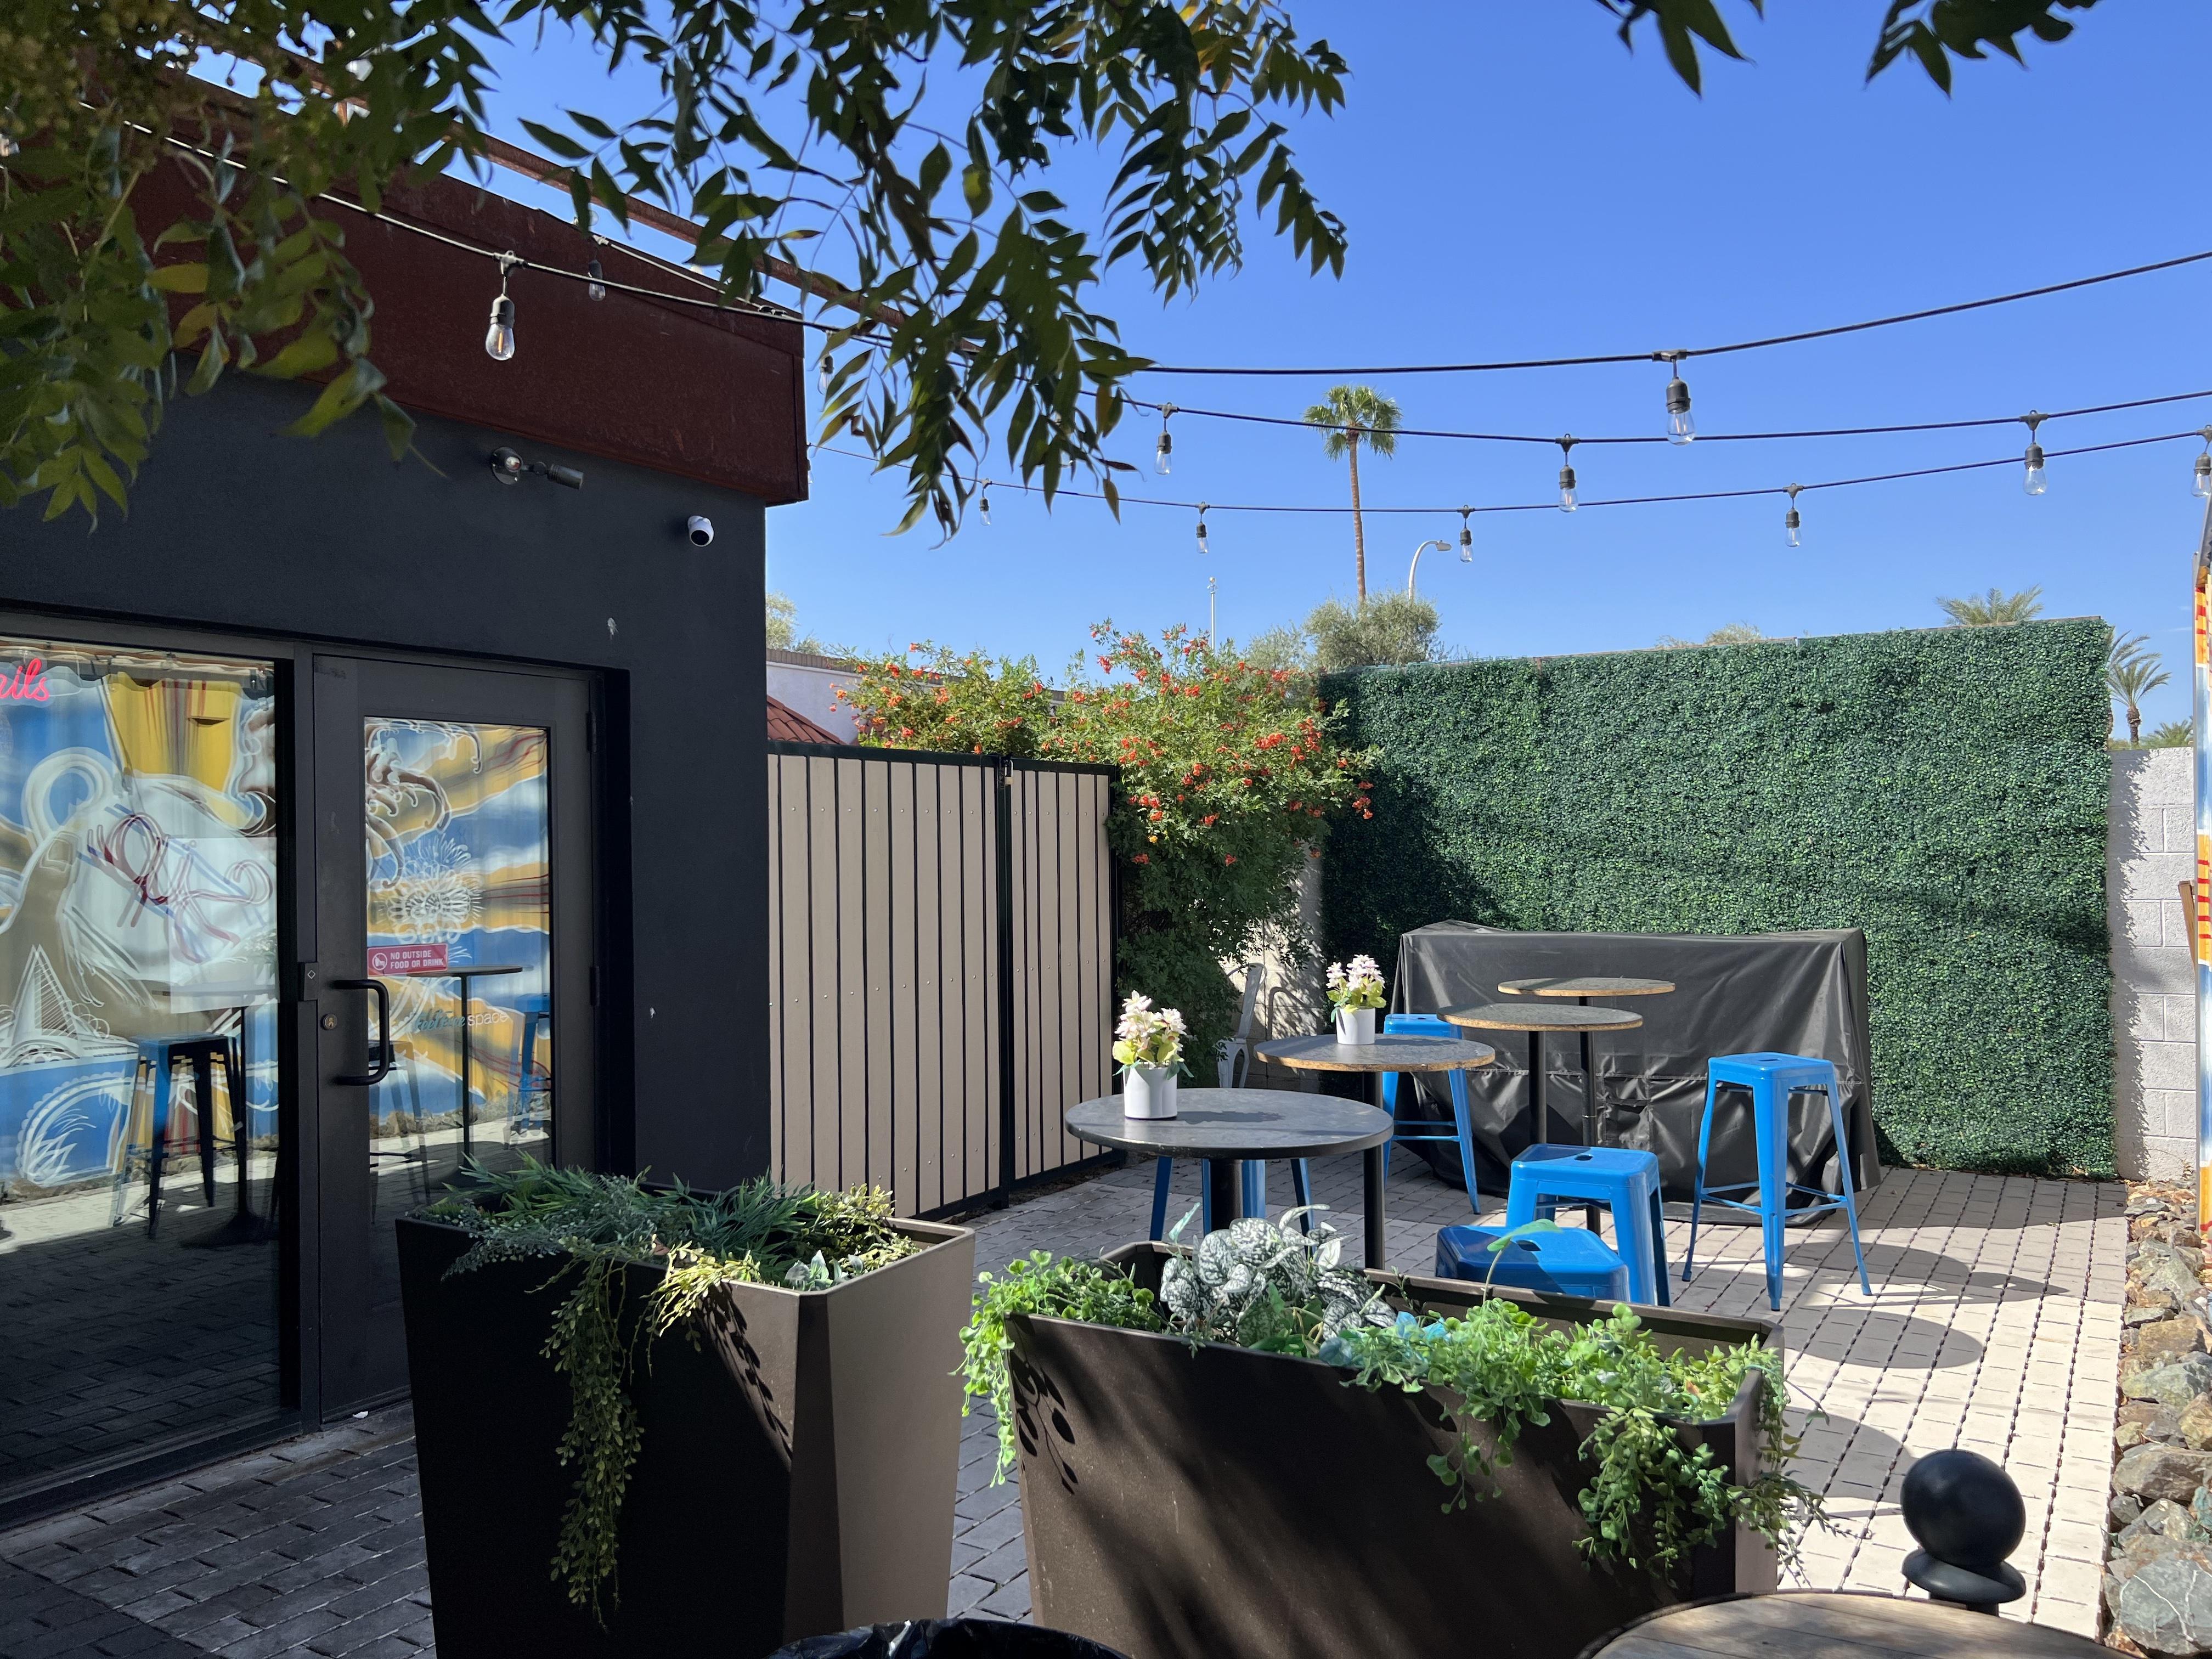 Our welcoming coffee shop with patio often becomes the stage for a multitude of events that we host, from heartwarming charity initiatives like Paws For a Cause to Yoga Classes and exciting pop-ups from local businesses.